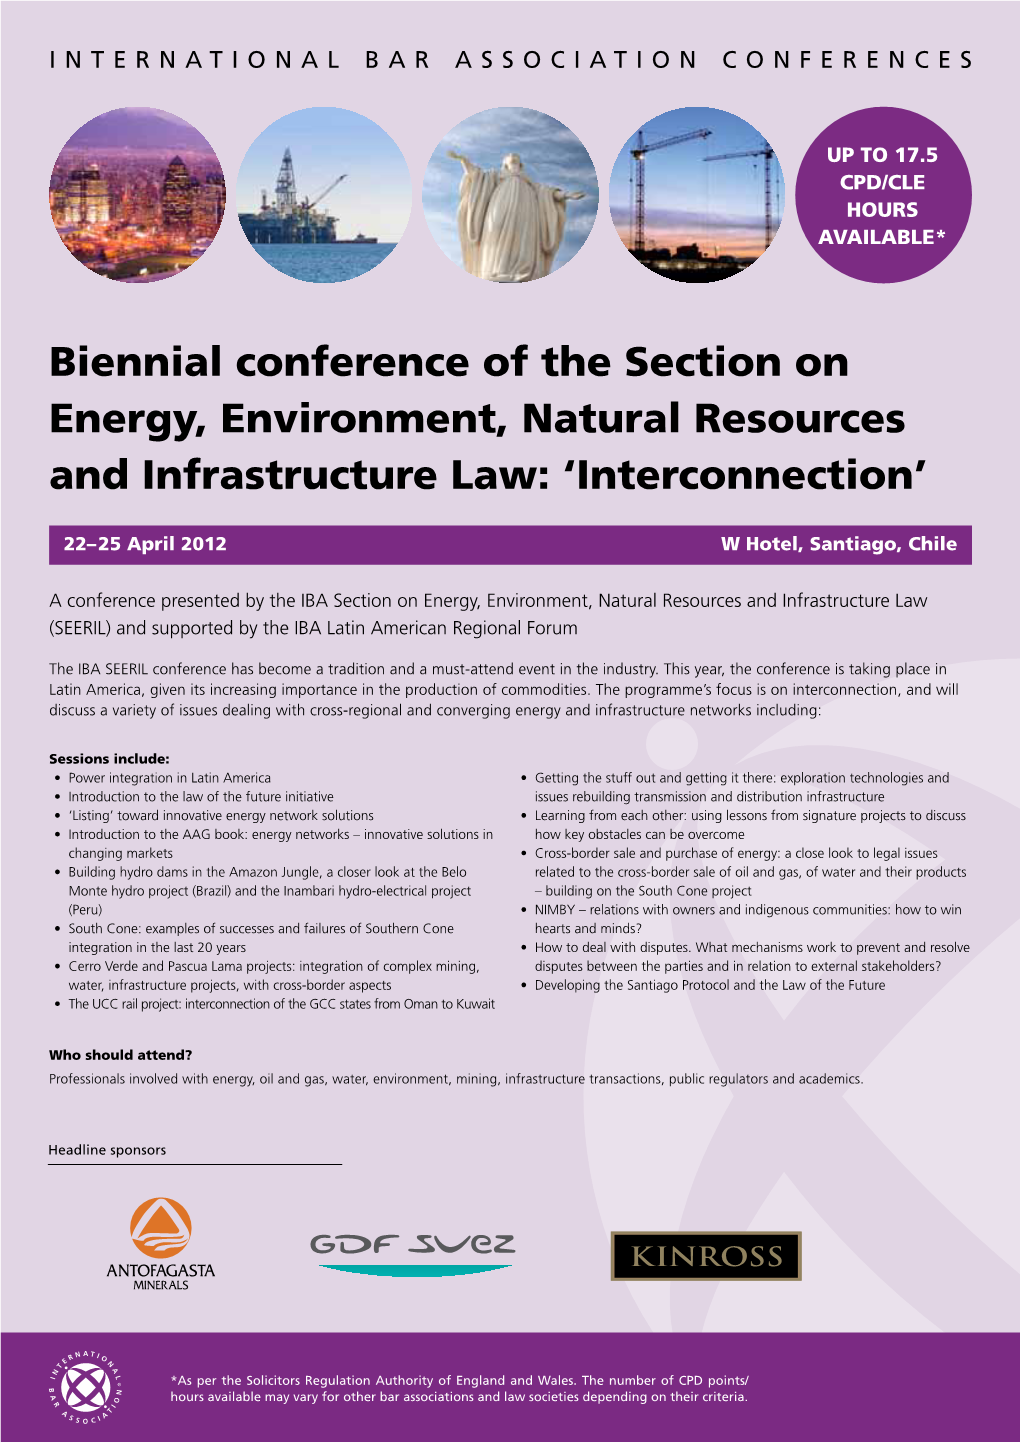 Biennial Conference of the Section on Energy, Environment, Natural Resources and Infrastructure Law: ‘Interconnection’